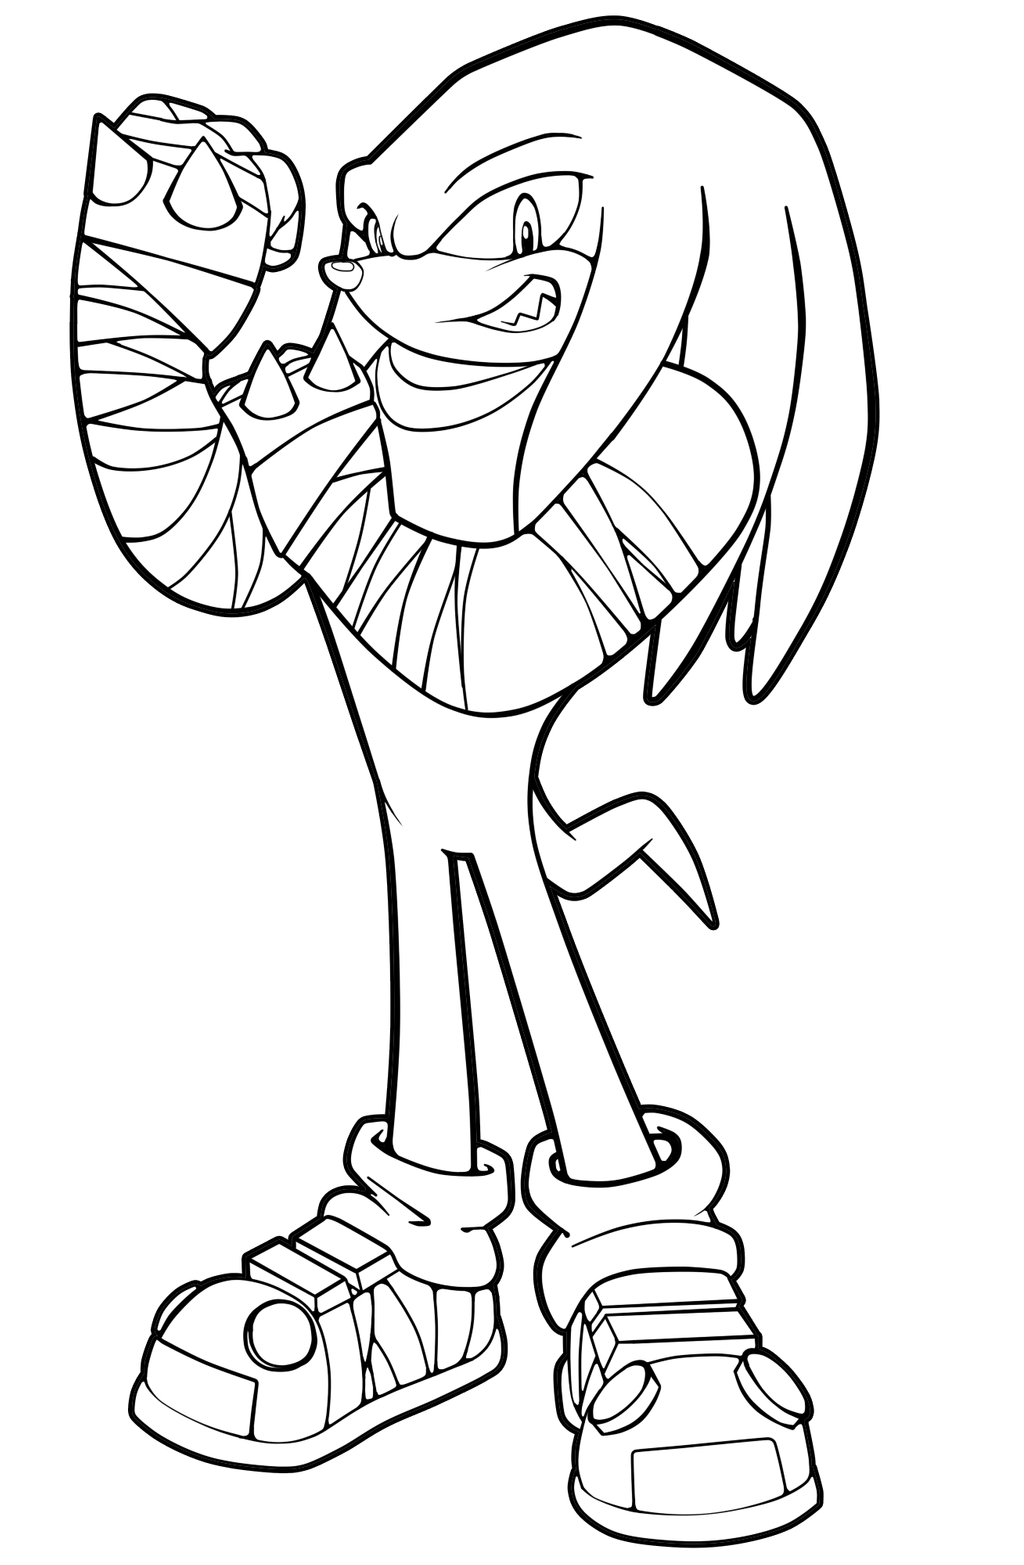 knuckles coloring pages knuckles boom sa style lineart by kyuubicore on deviantart knuckles coloring pages 